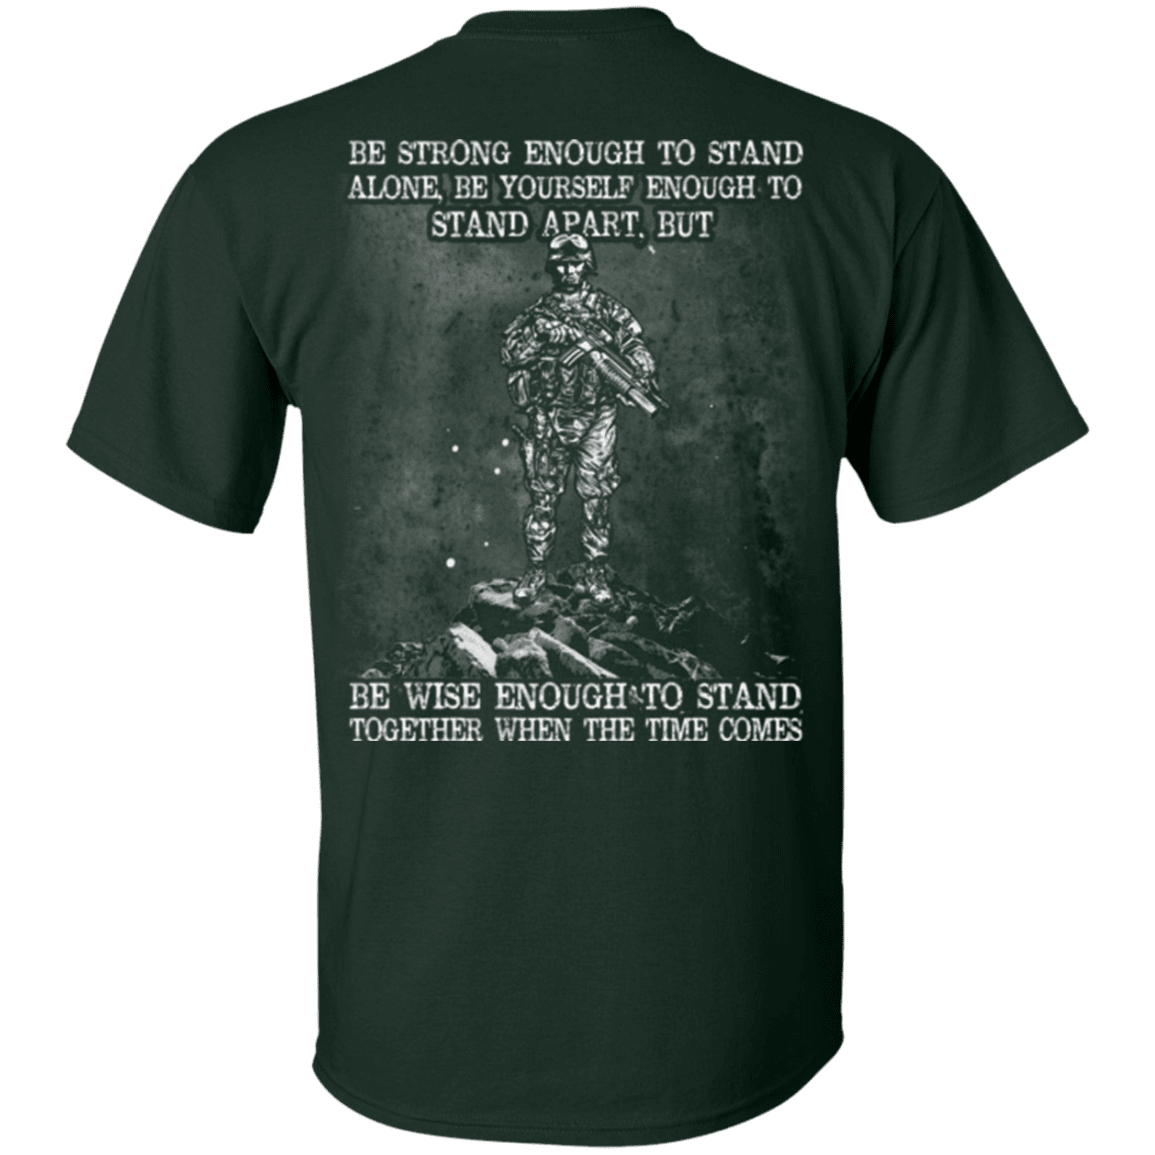 Military T-Shirt "Strong Enough To Stand Together Veteran"-TShirt-General-Veterans Nation